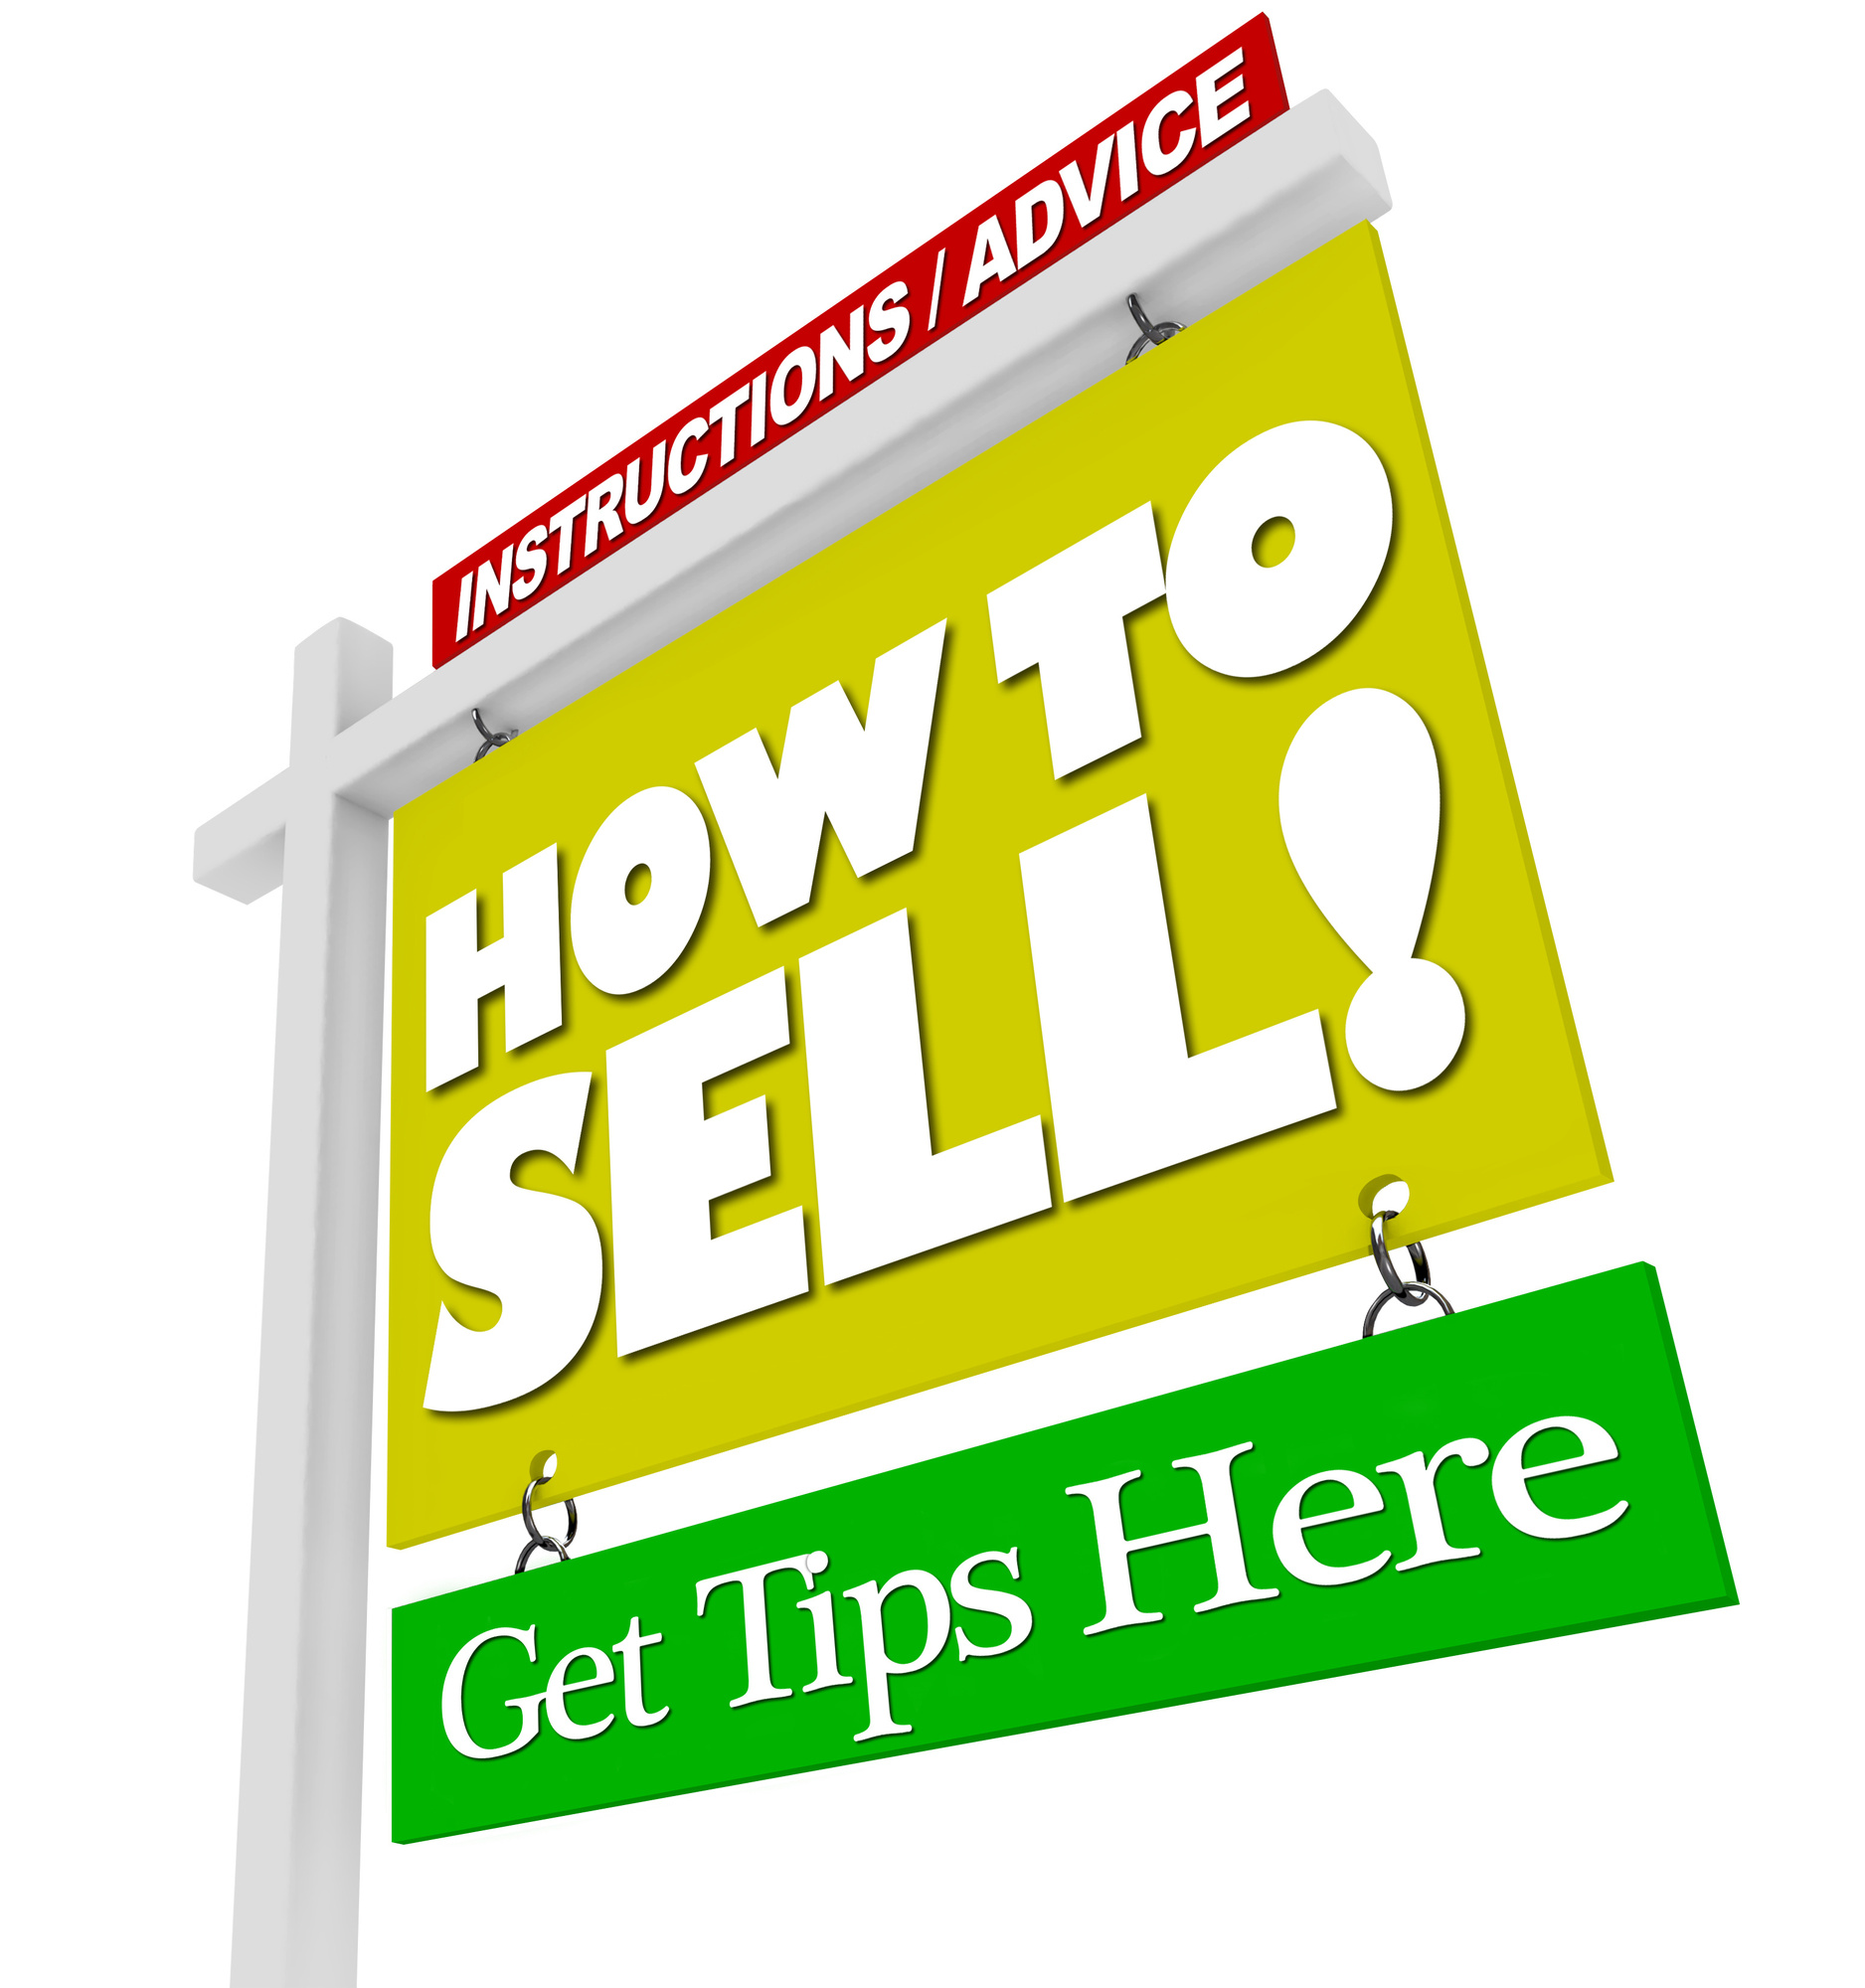 4 Top Tips to Sell a House Quickly